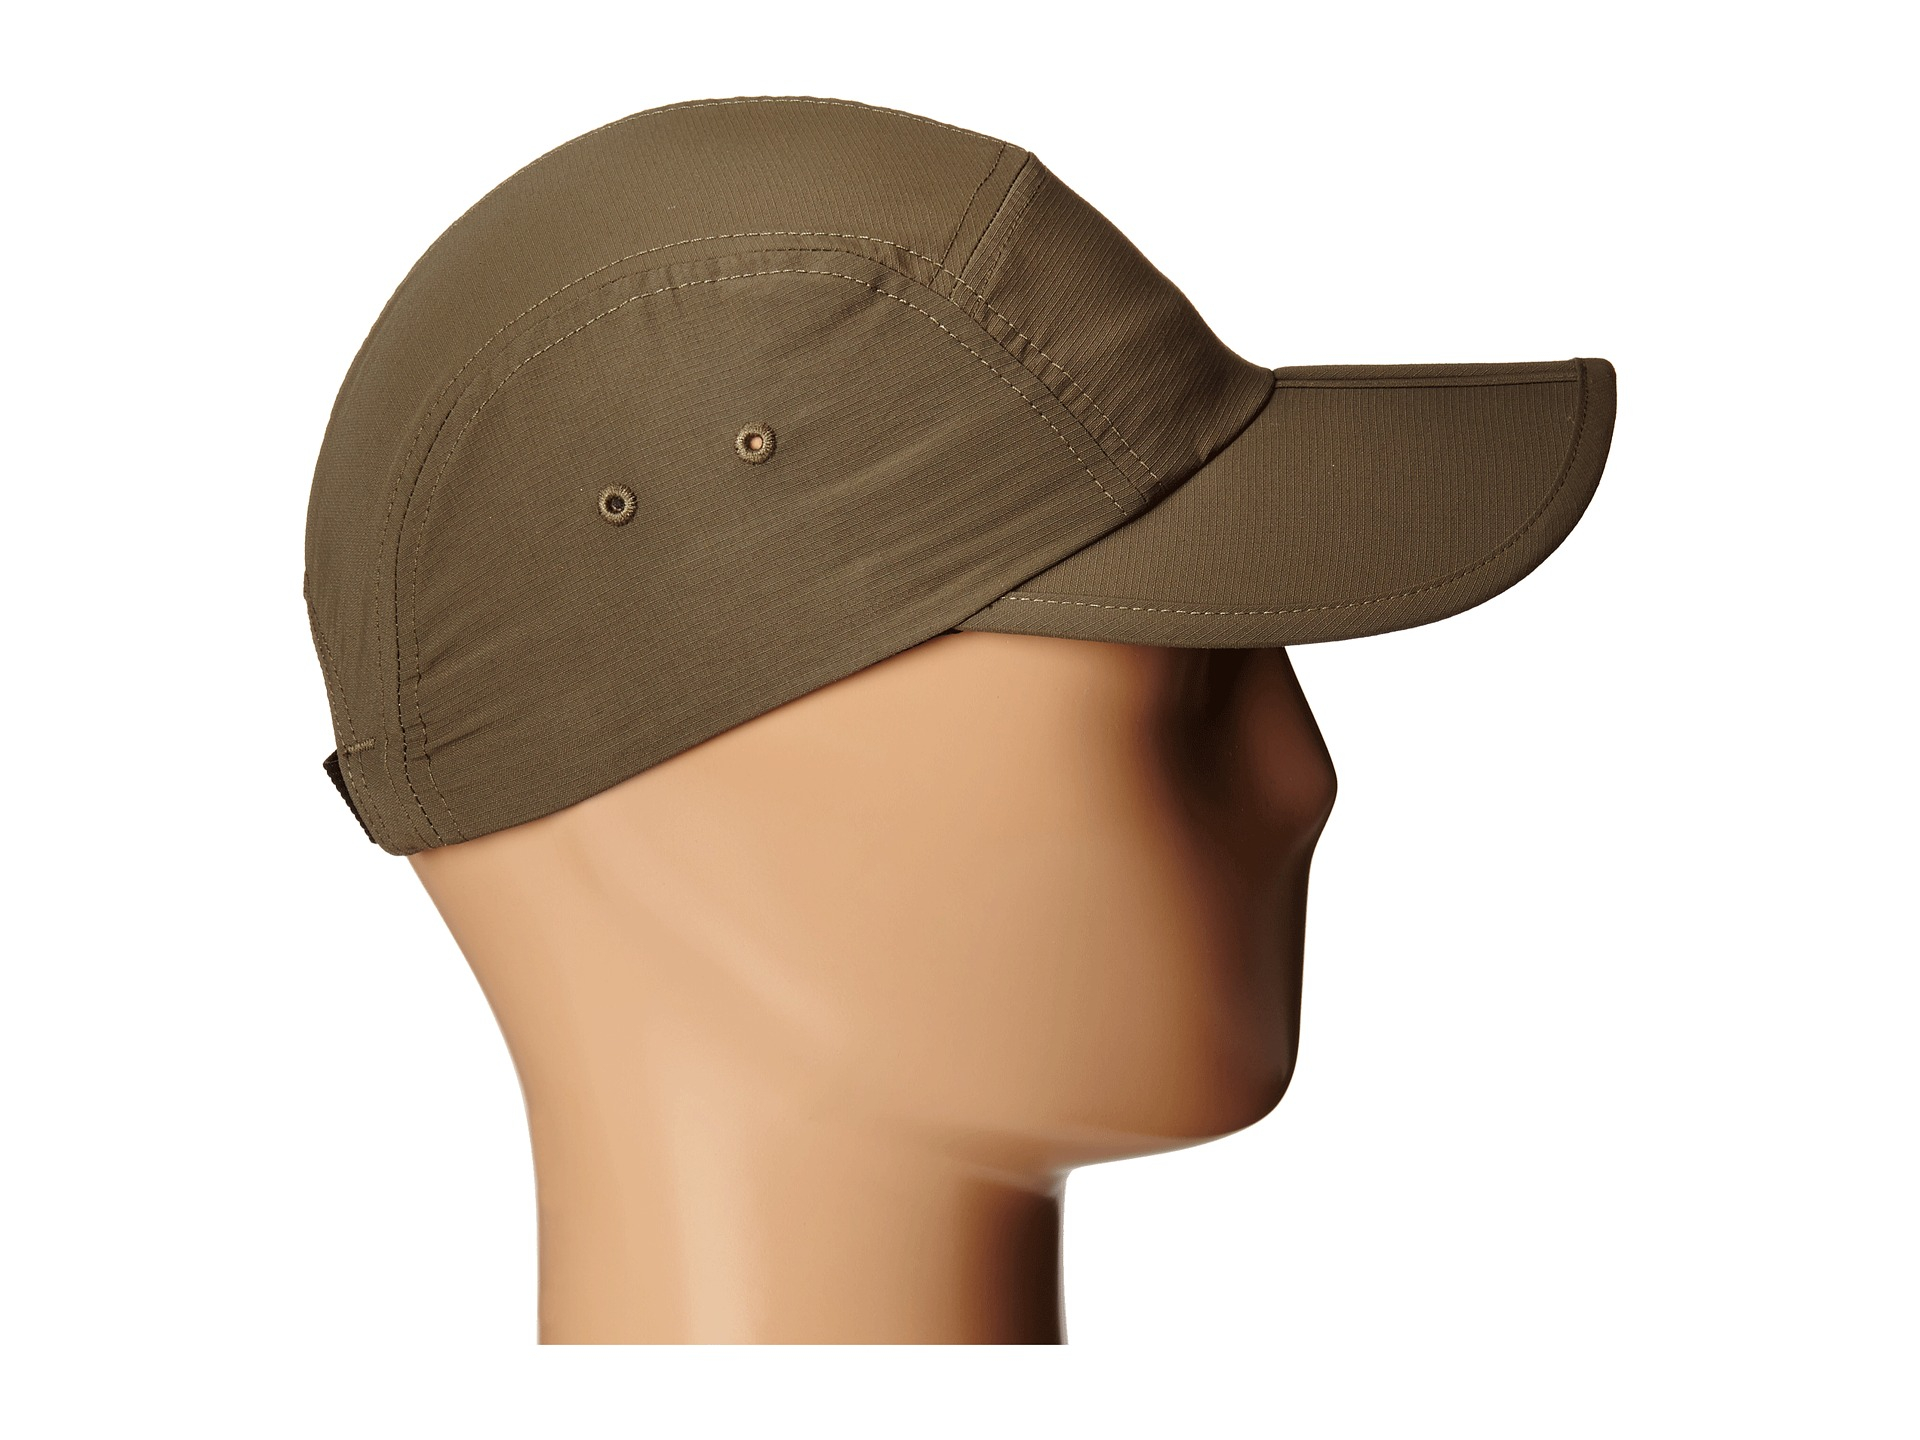 The North Face Horizon Folding Bill Cap in Brown for Men - Lyst